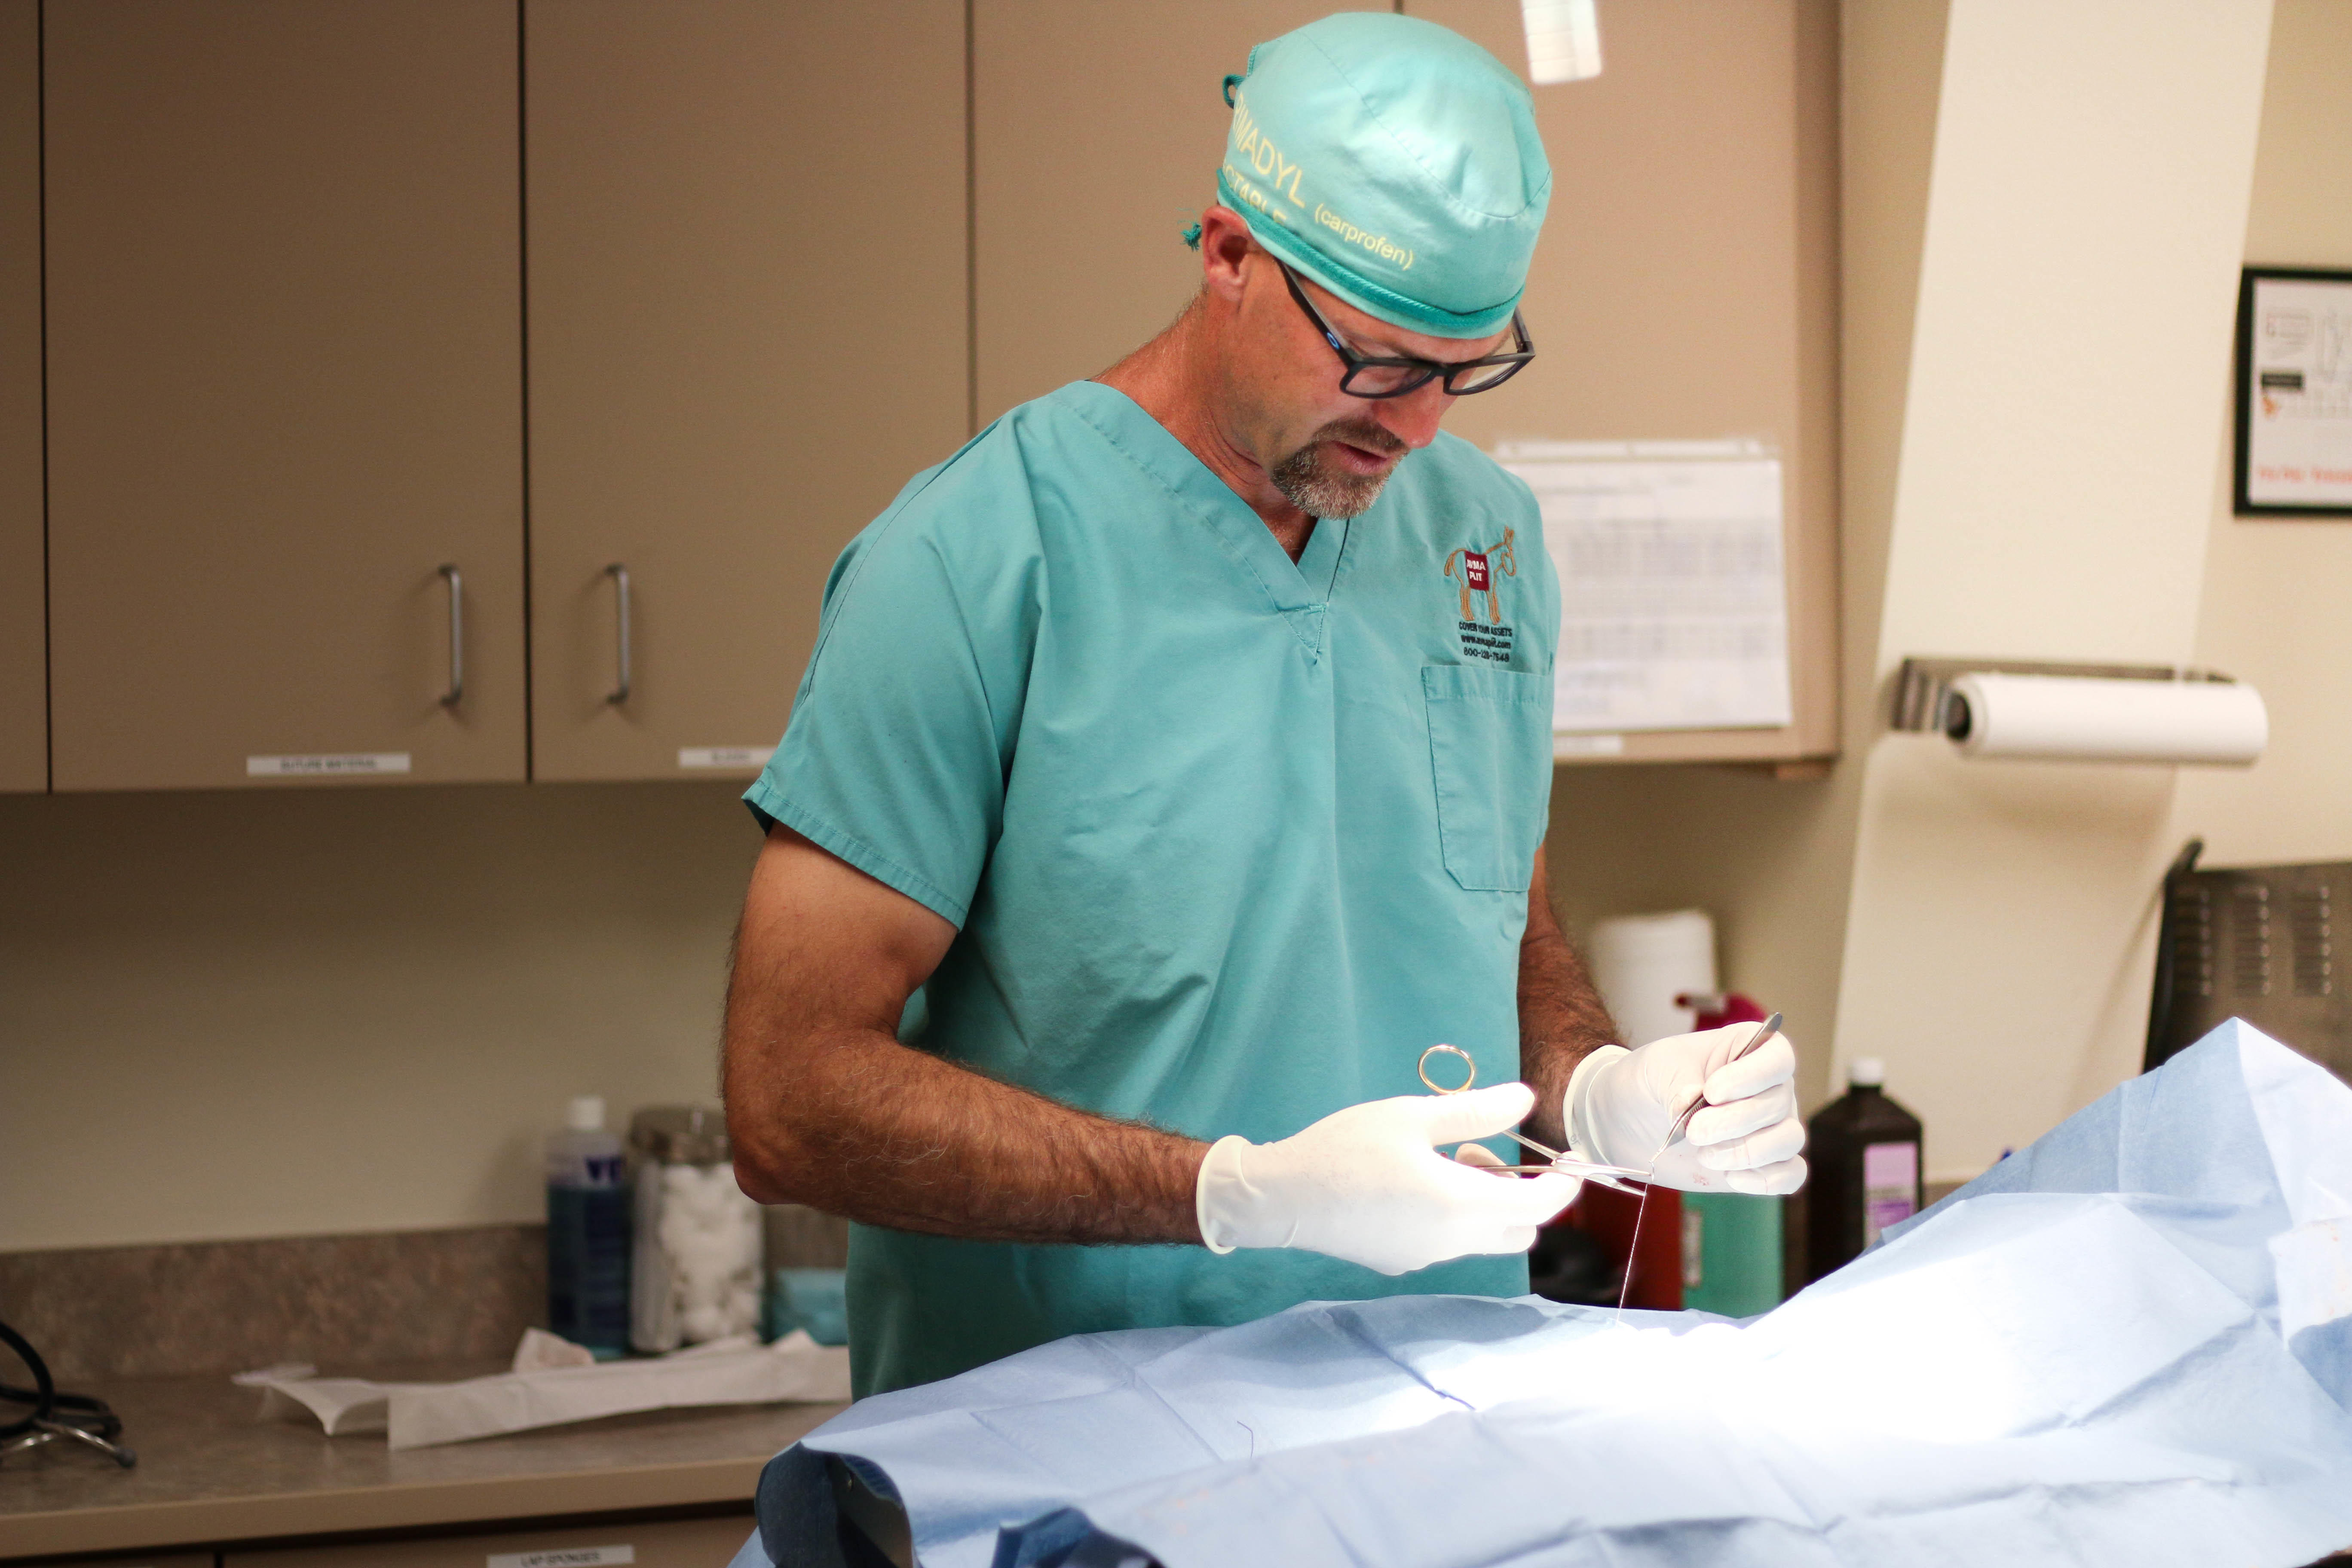 Dr. Jeremy Ley is focused and hard at work while performing a surgery.